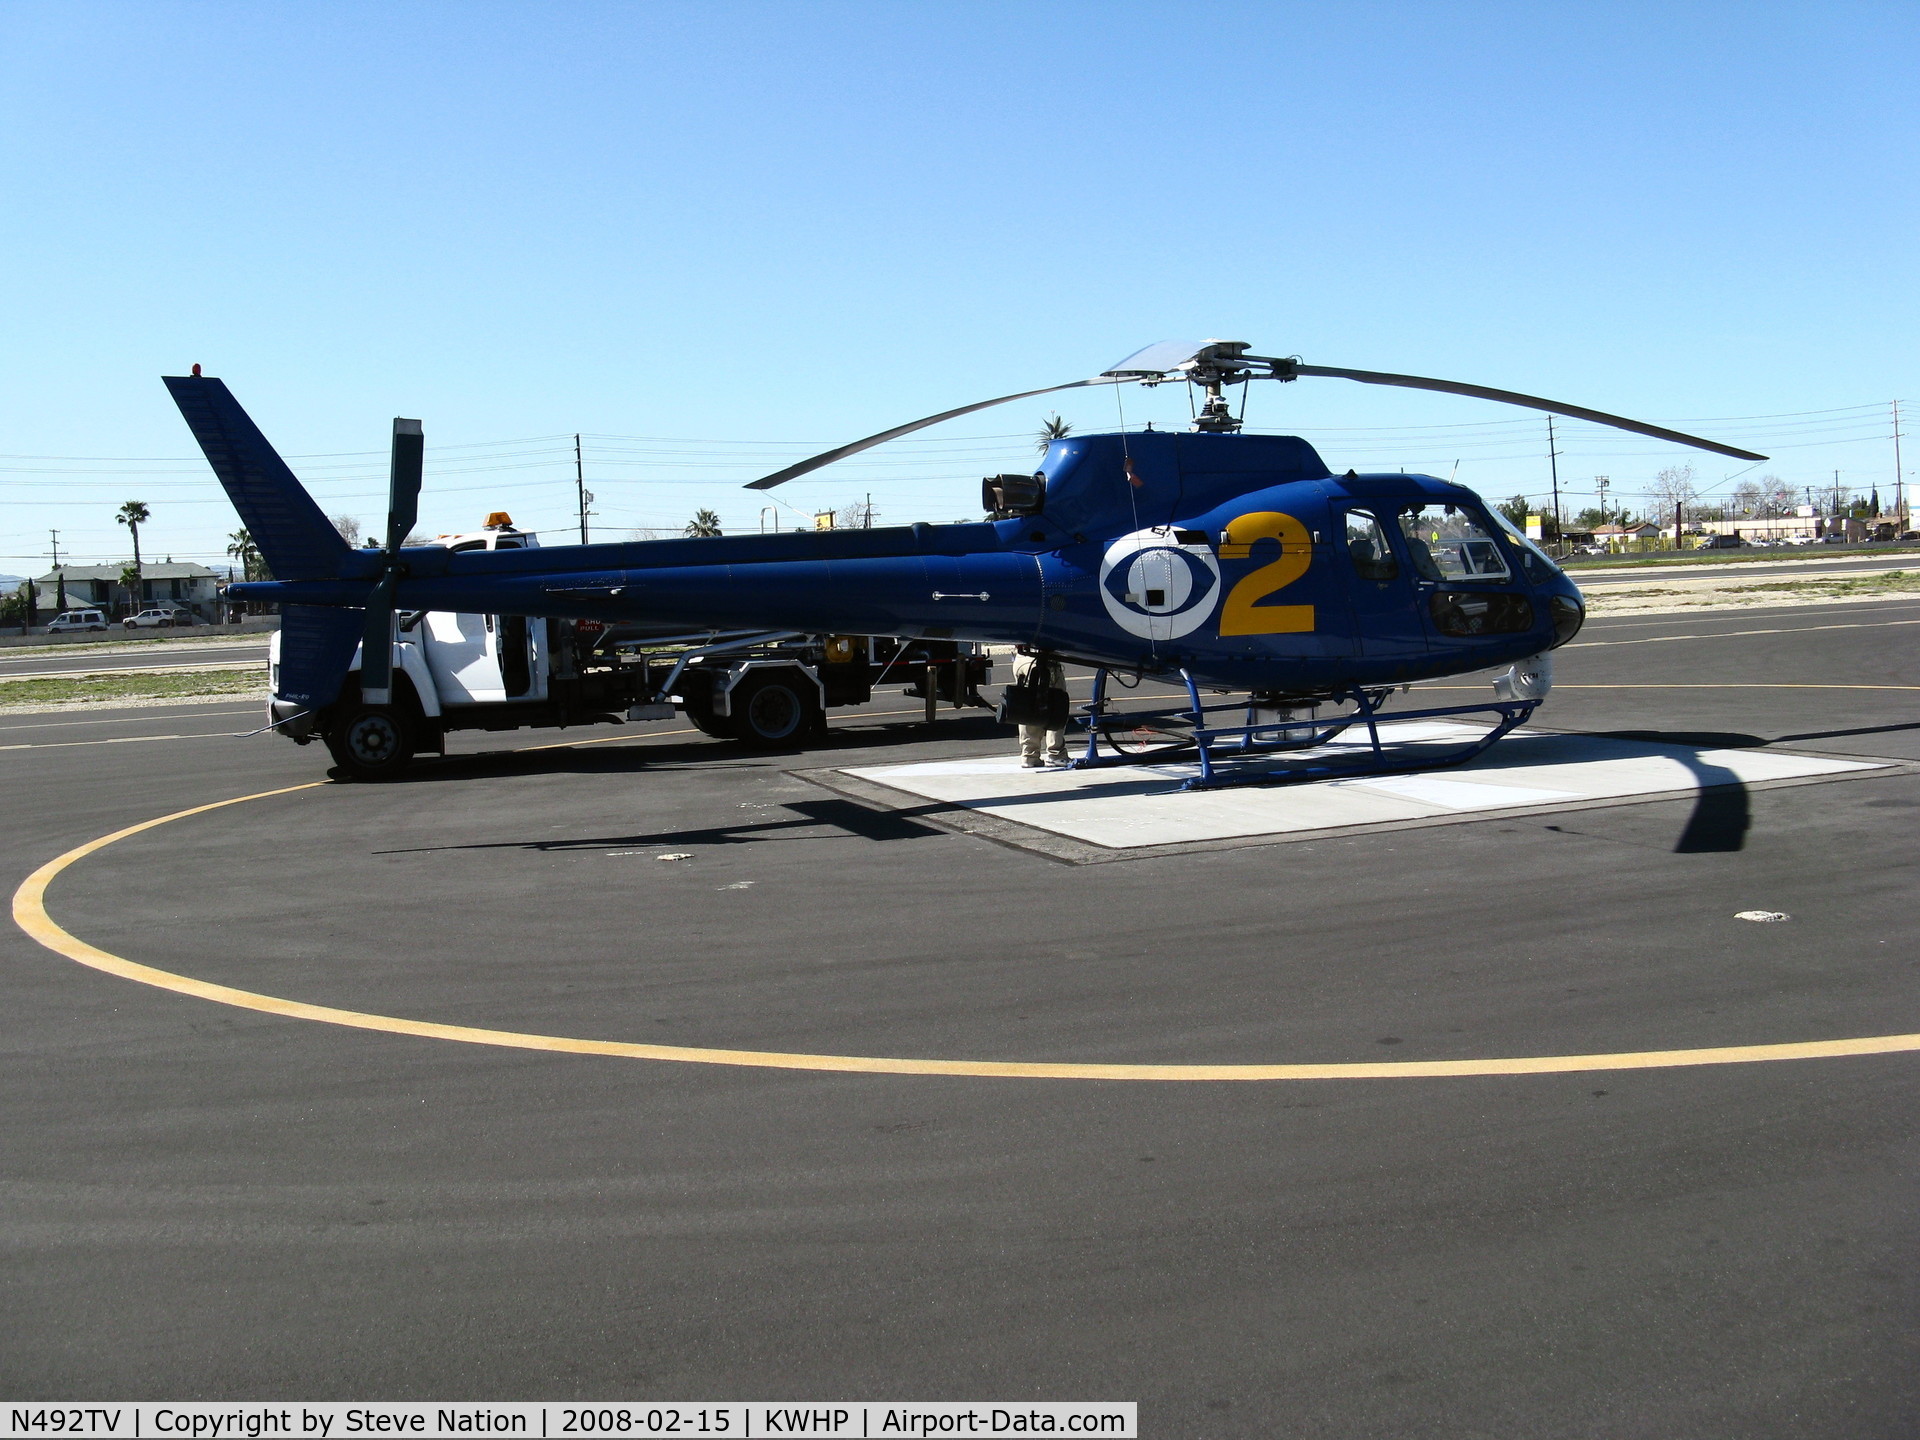 N492TV, Aerospatiale AS-350B Ecureuil C/N 2030, Locally-Based news copter Aerospatiale AS-350B operated by Tiny Bubbles Aviation (Glendale, CA) for KTLA 2  @ Whiteman Airport, Pacoima, CA